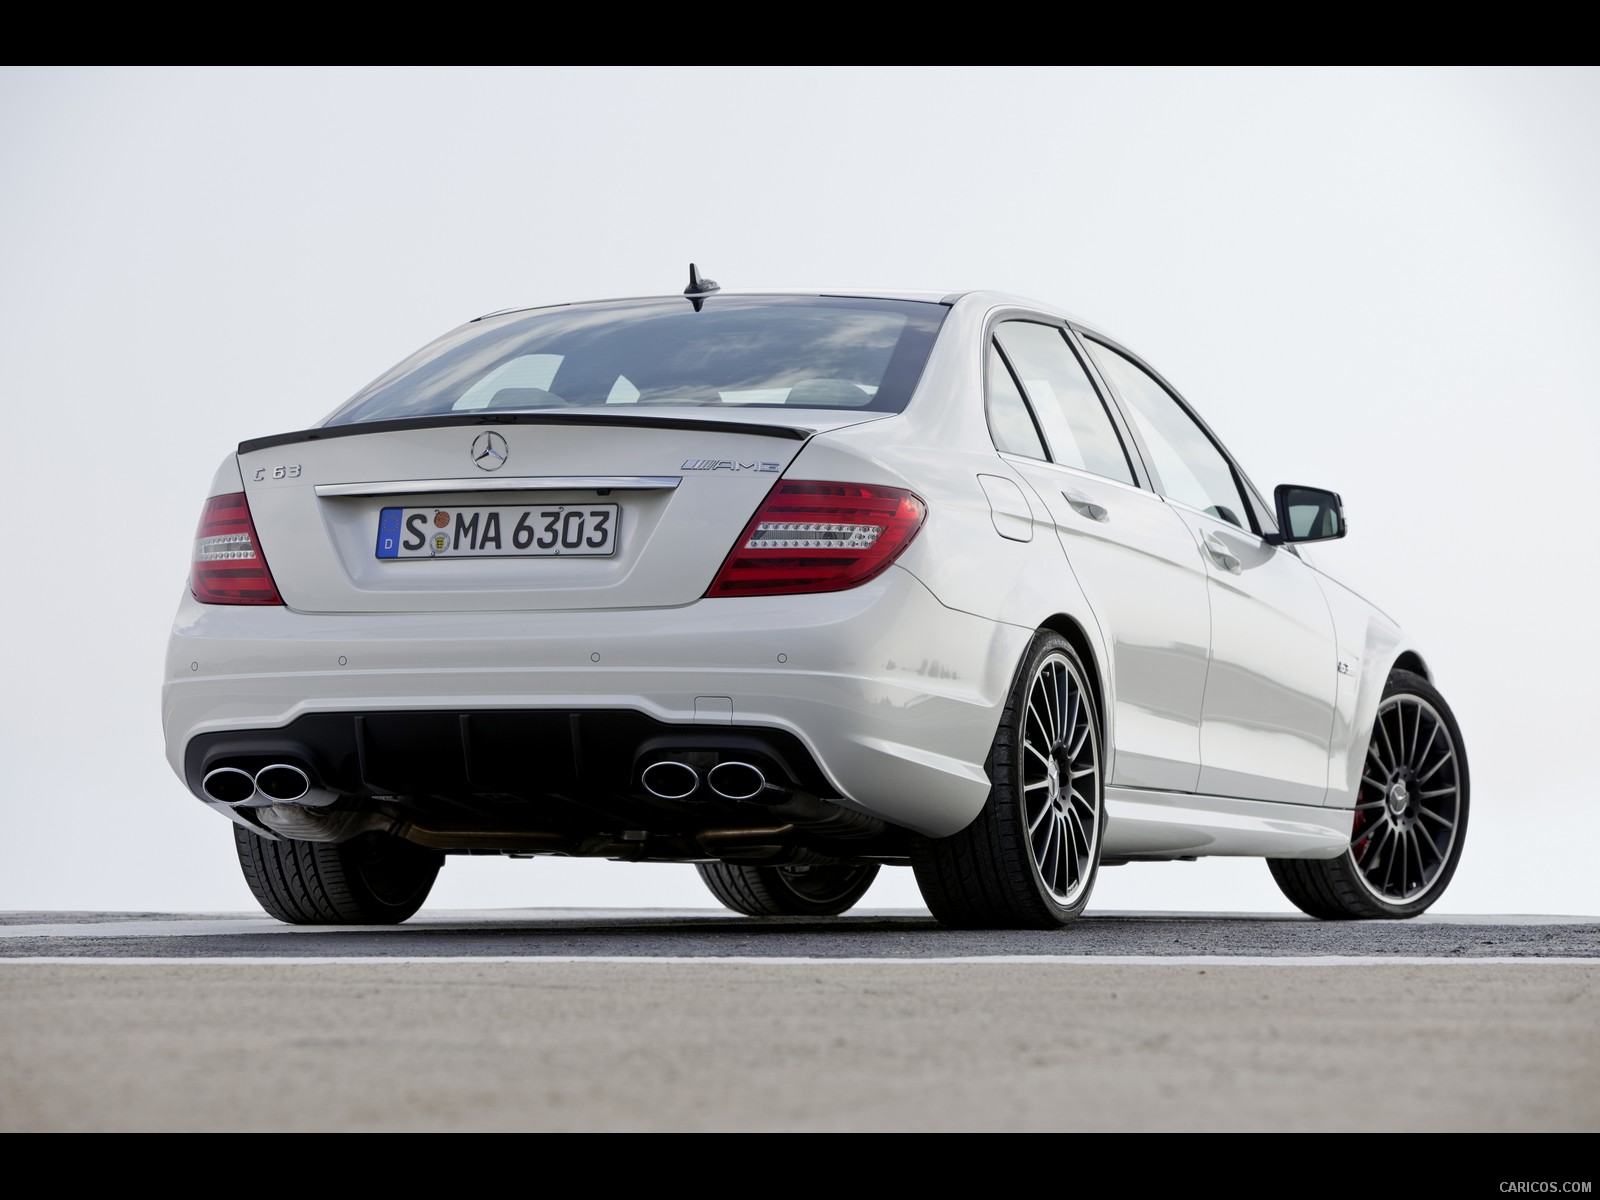 Mercedes-Benz C63 AMG (2012)  - Rear Angle , #8 of 22